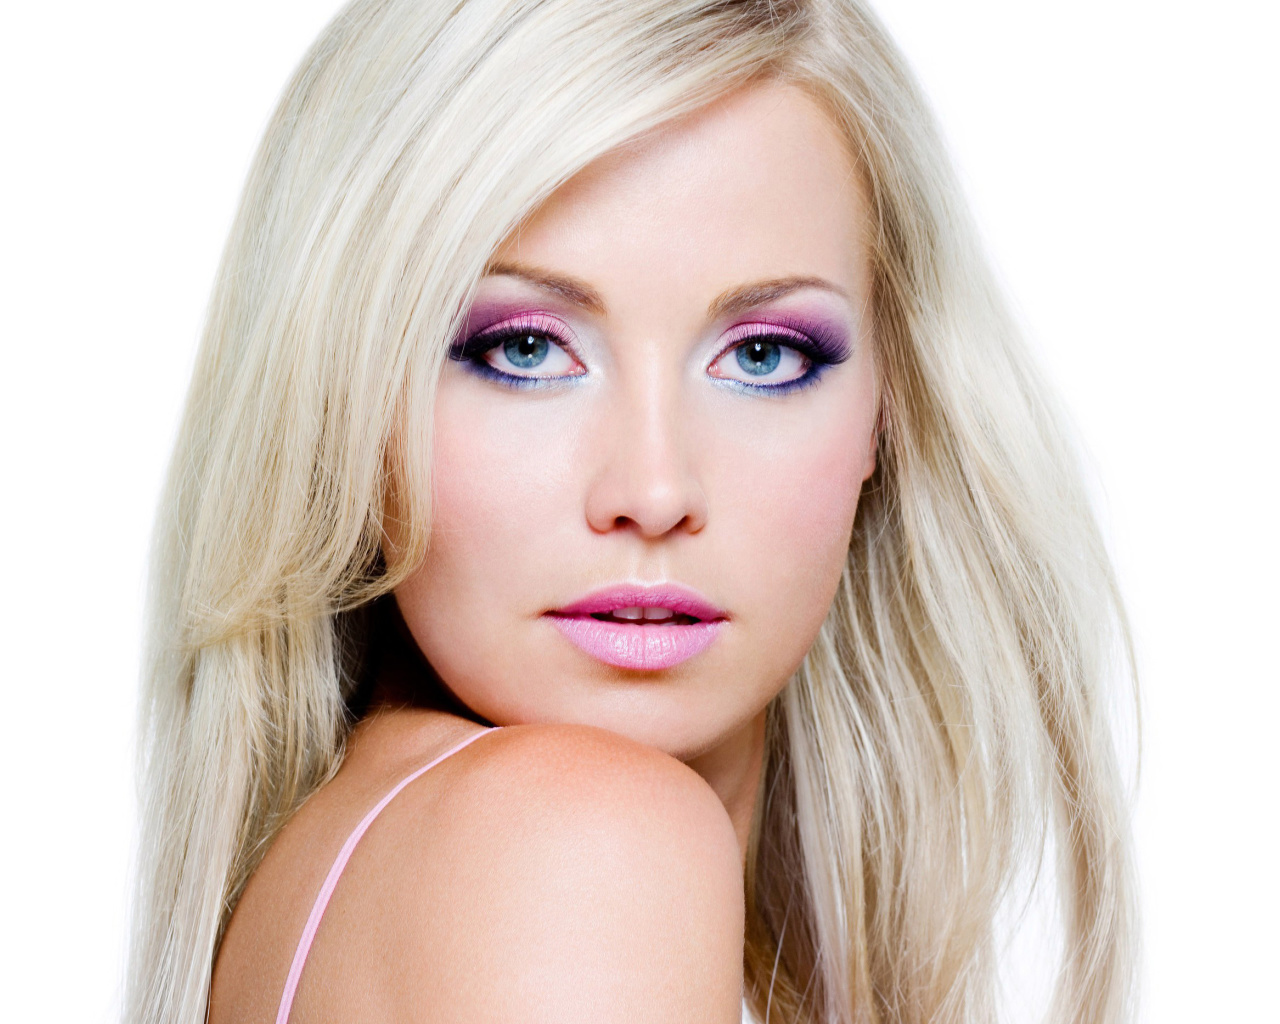 Blonde with Perfect Makeup wallpaper 1280x1024